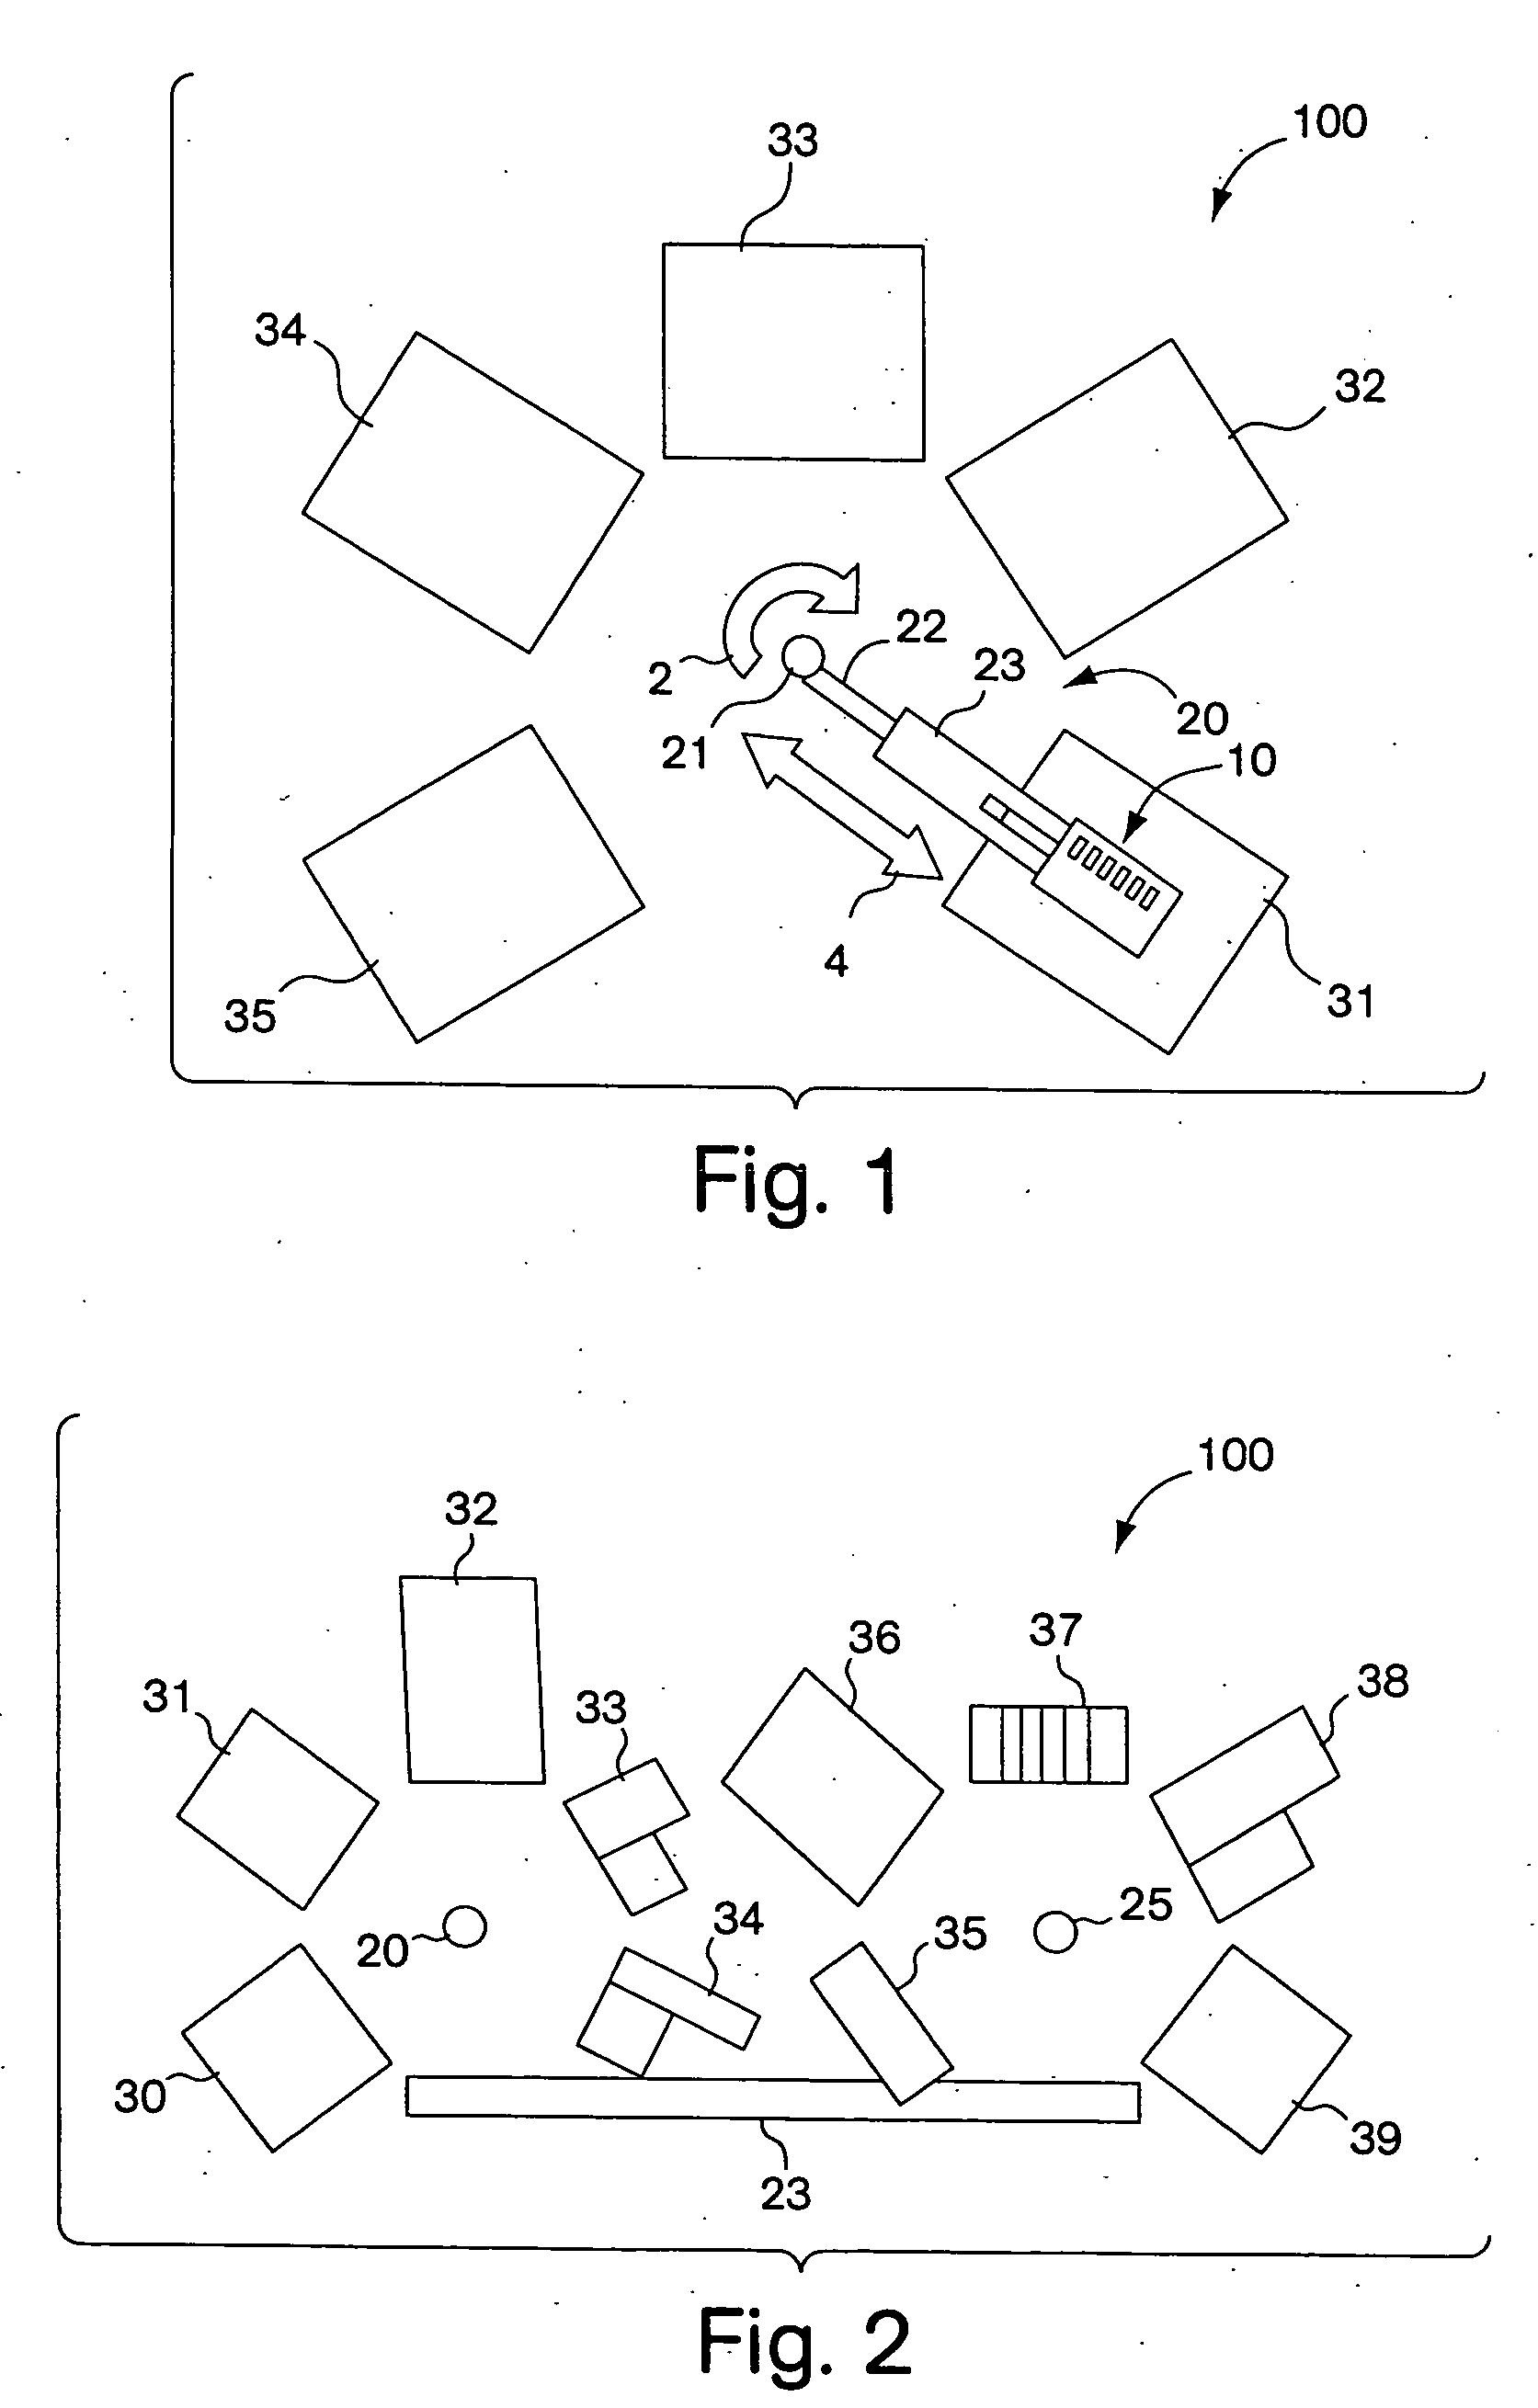 System and method for process automation